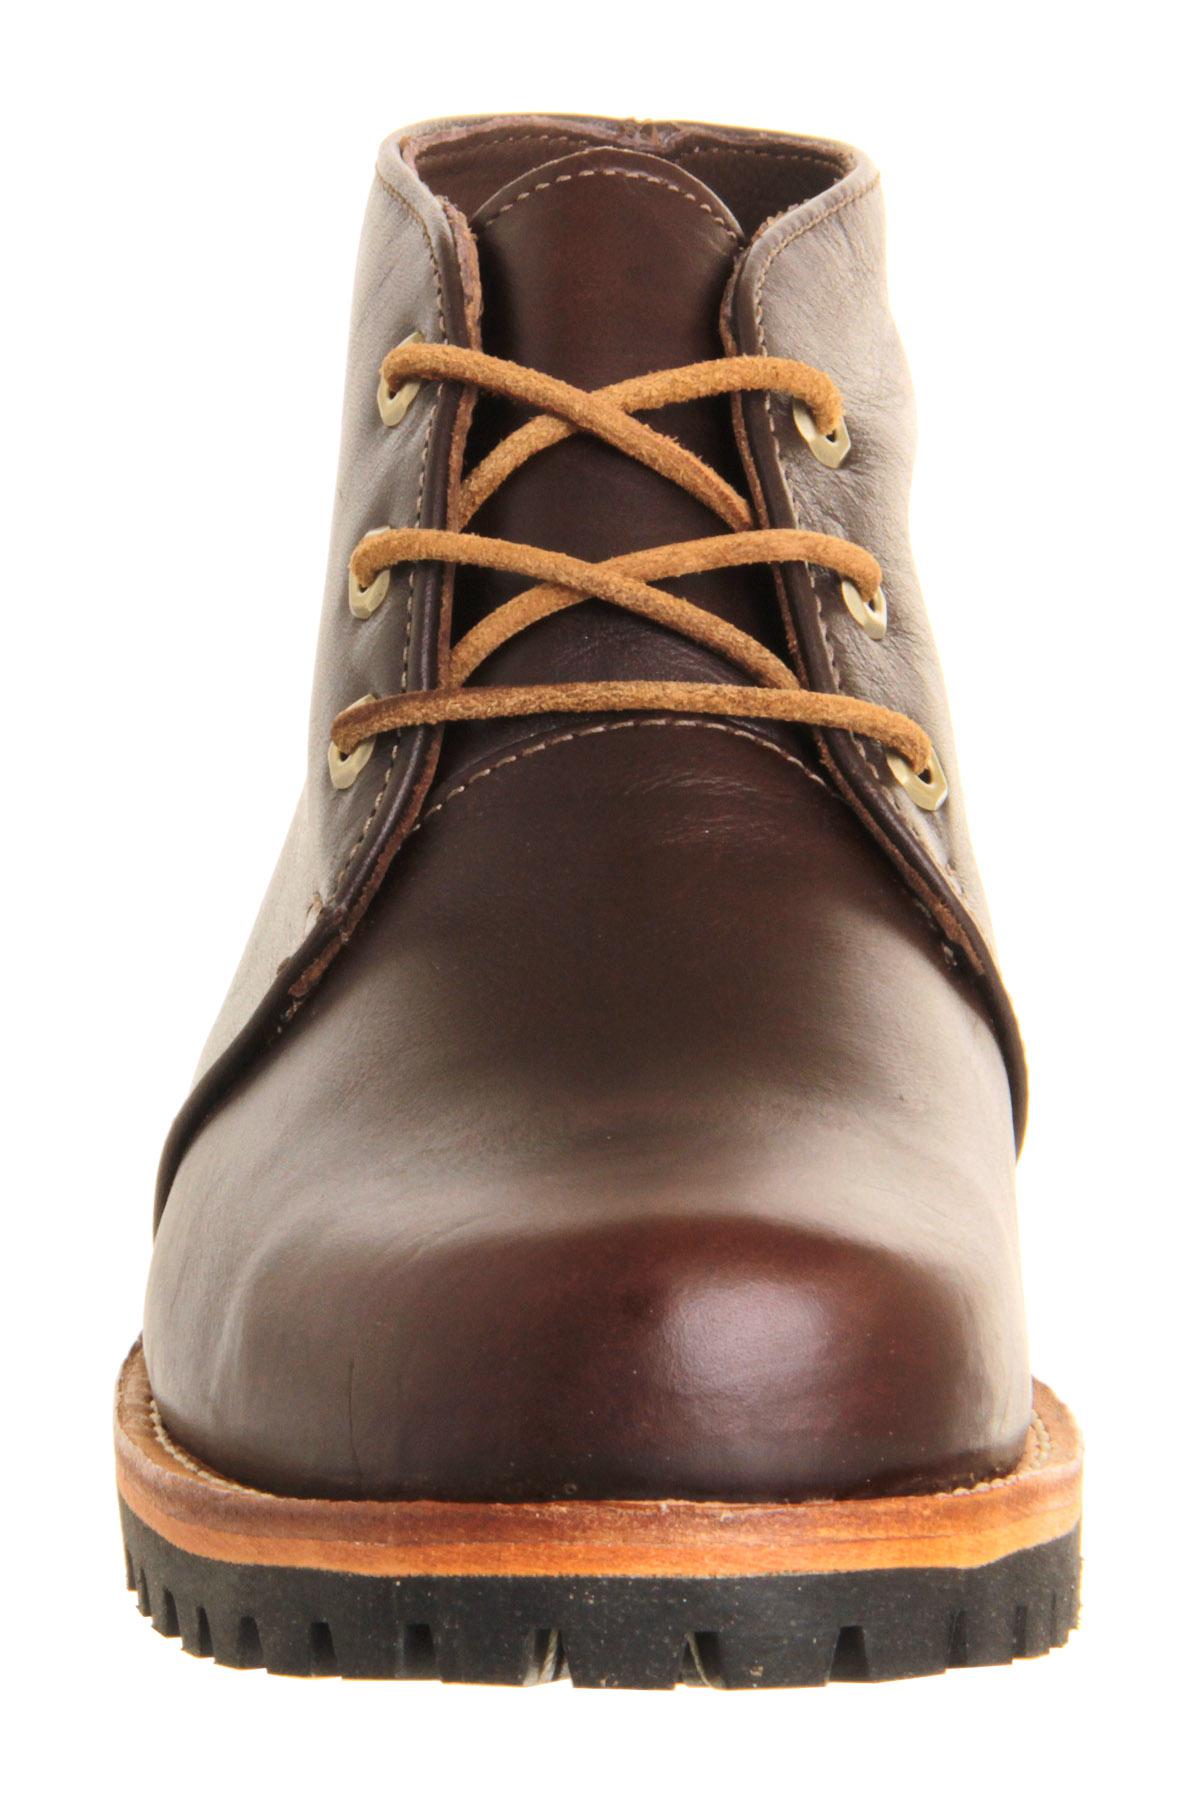 Timberland Heritage Ltd Rugged Chukka in Brown for Men - Lyst